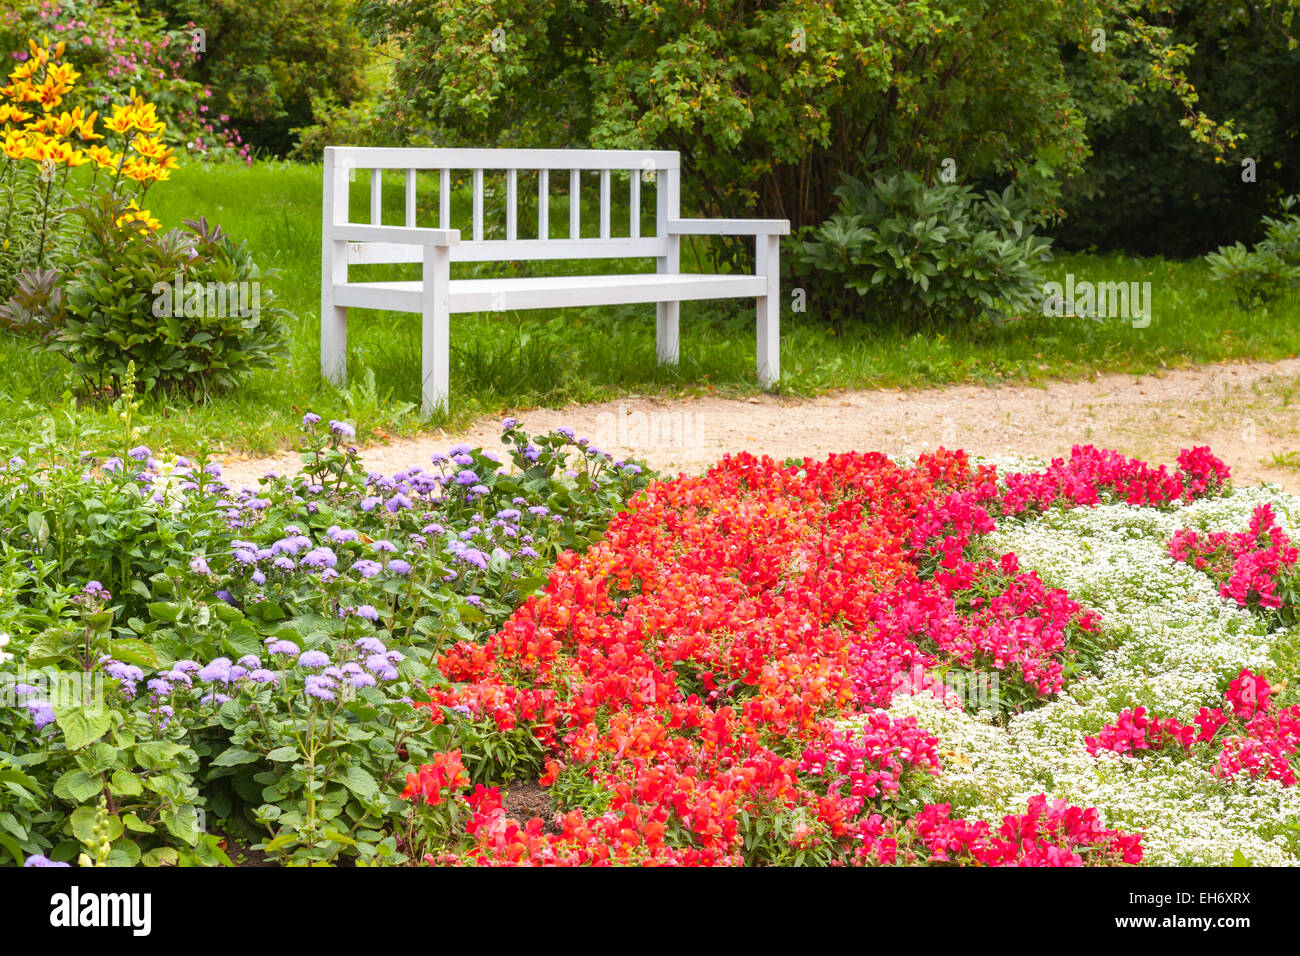 Colorful flowers on the flowerbed in summer park. White wooden bench on the background. Selective focus. Trigorskoye village, Ru Stock Photo